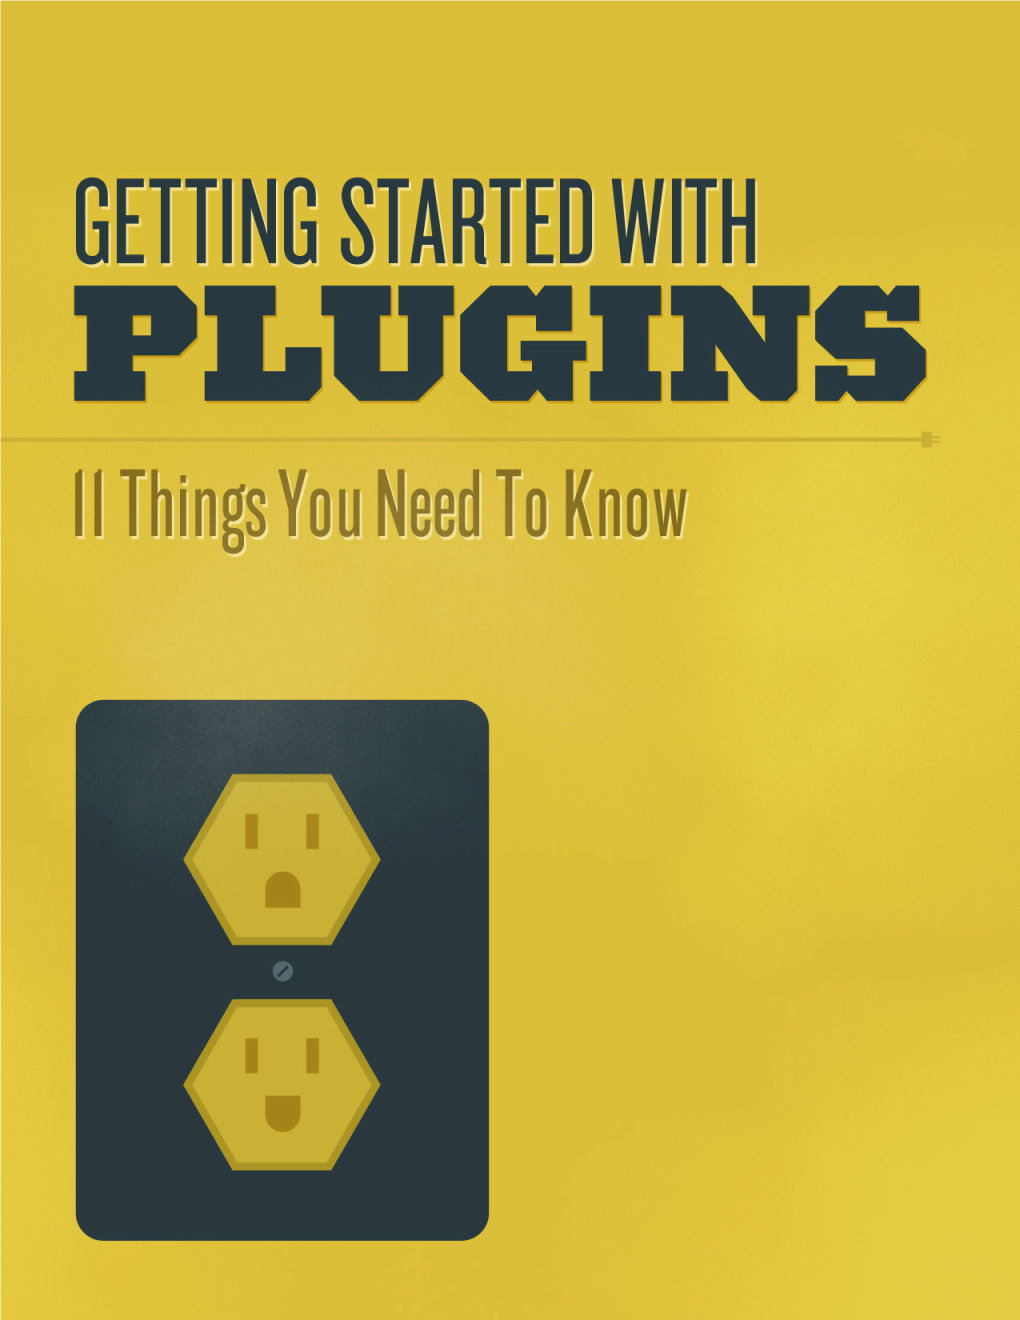 Getting Started with Wordpress Plugins